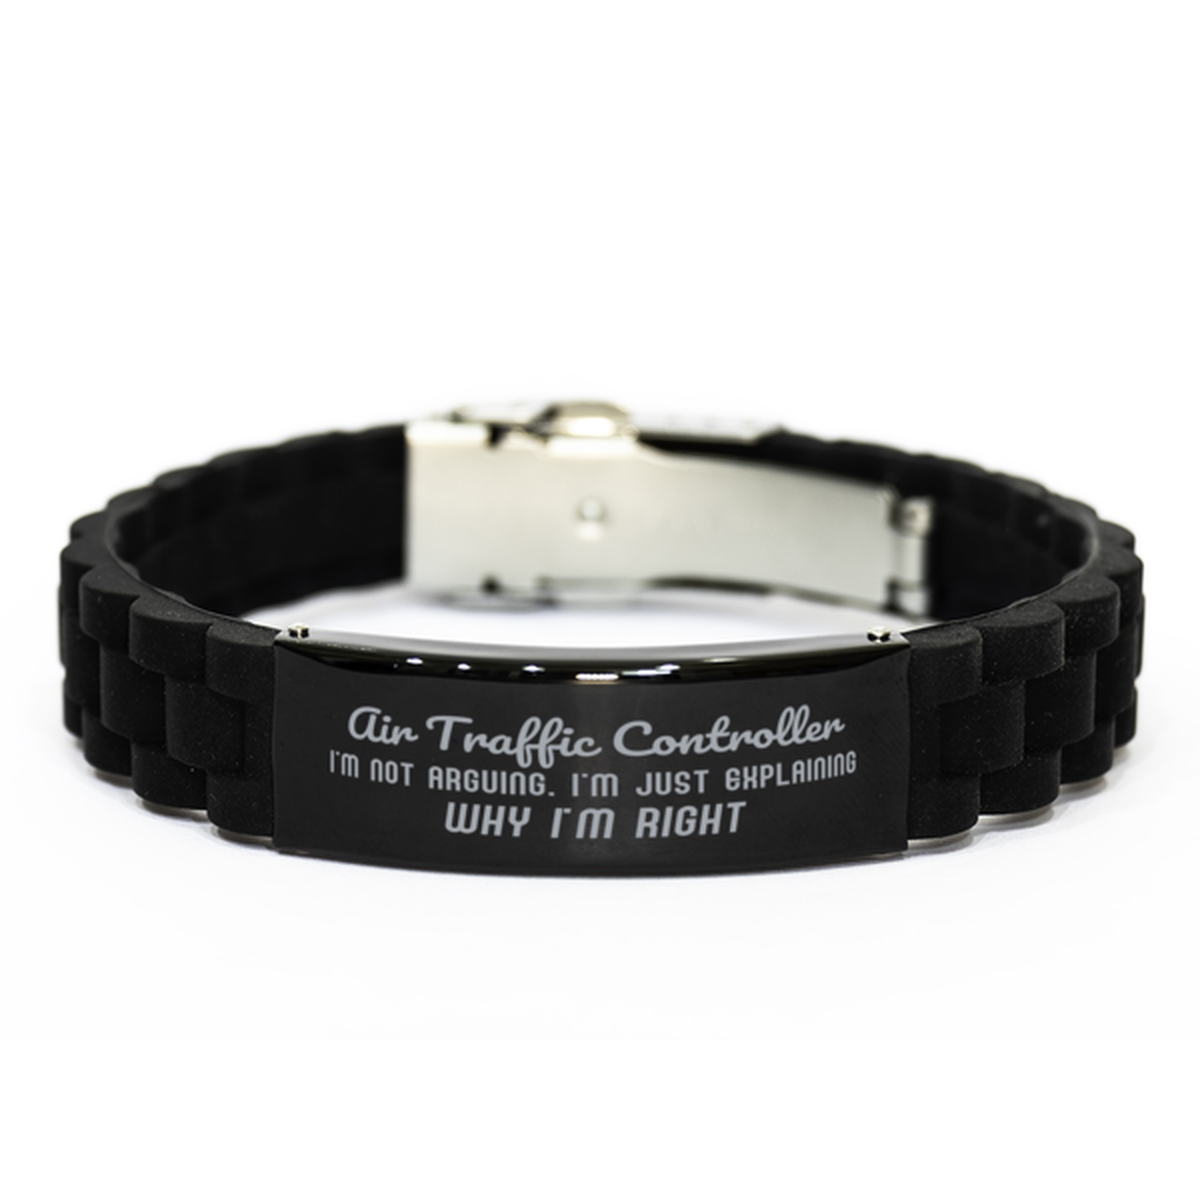 Air Traffic Controller I'm not Arguing. I'm Just Explaining Why I'm RIGHT Black Glidelock Clasp Bracelet, Funny Saying Quote Air Traffic Controller Gifts For Air Traffic Controller Graduation Birthday Christmas Gifts for Men Women Coworker